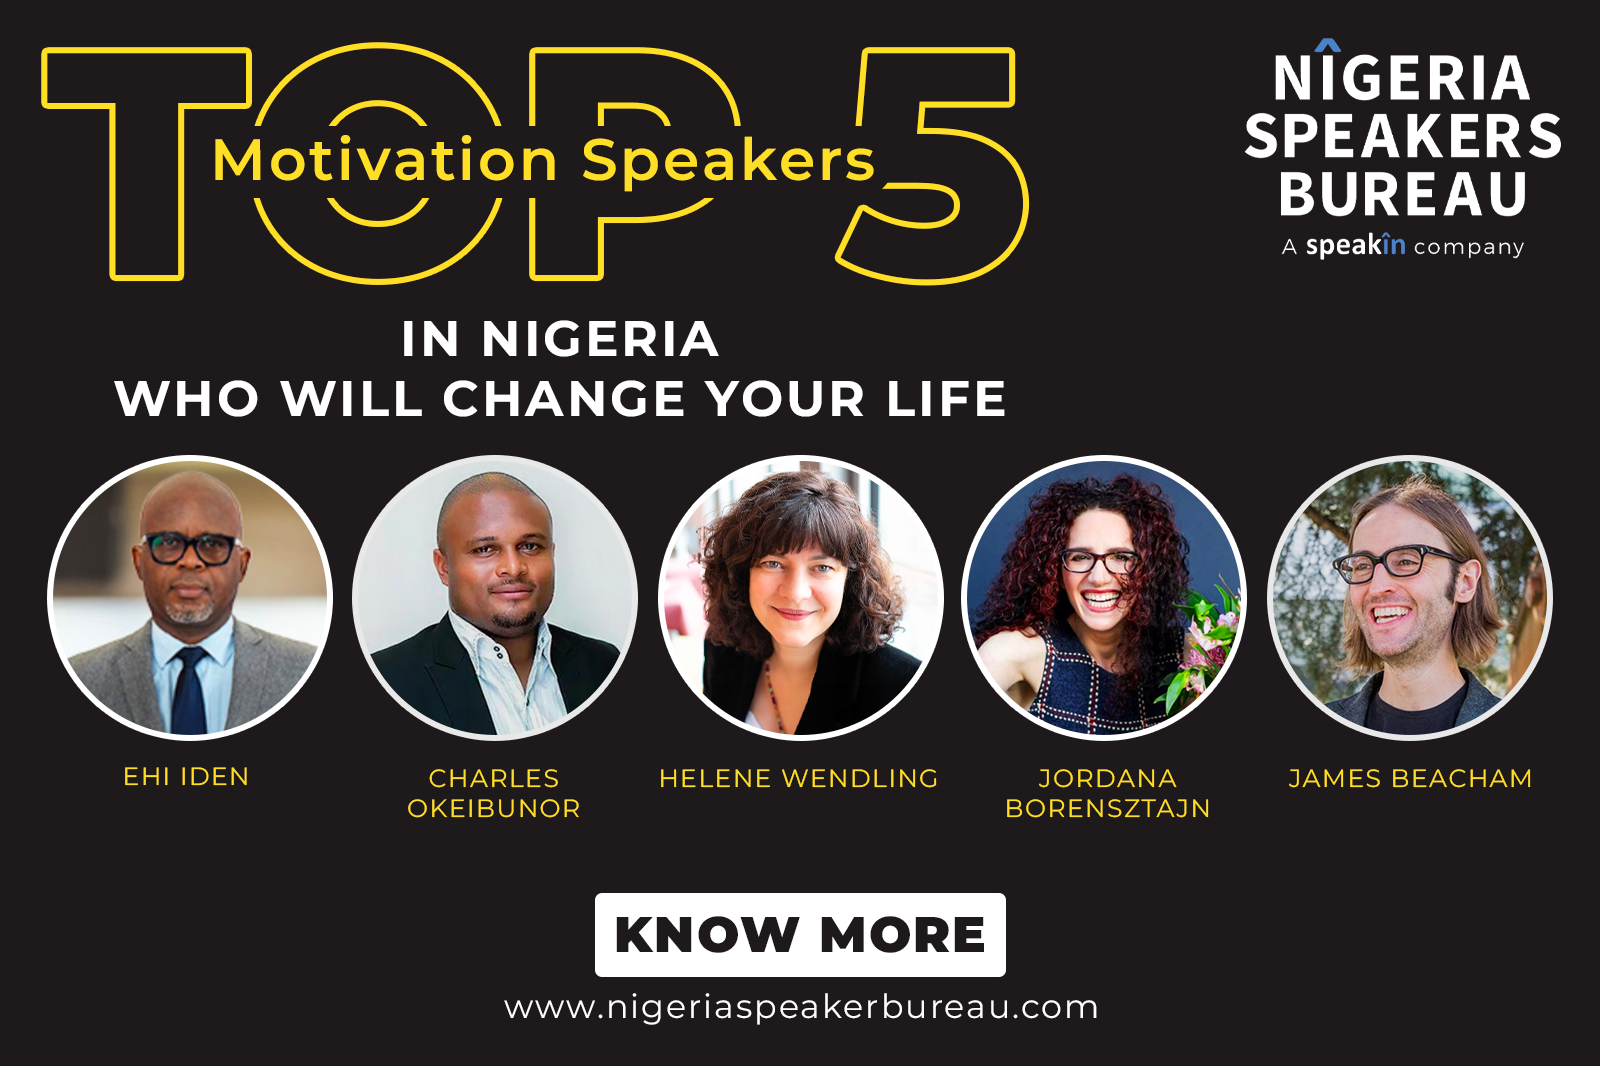 Top 5 Motivational Speakers in Nigeria Who Will Change Your Life